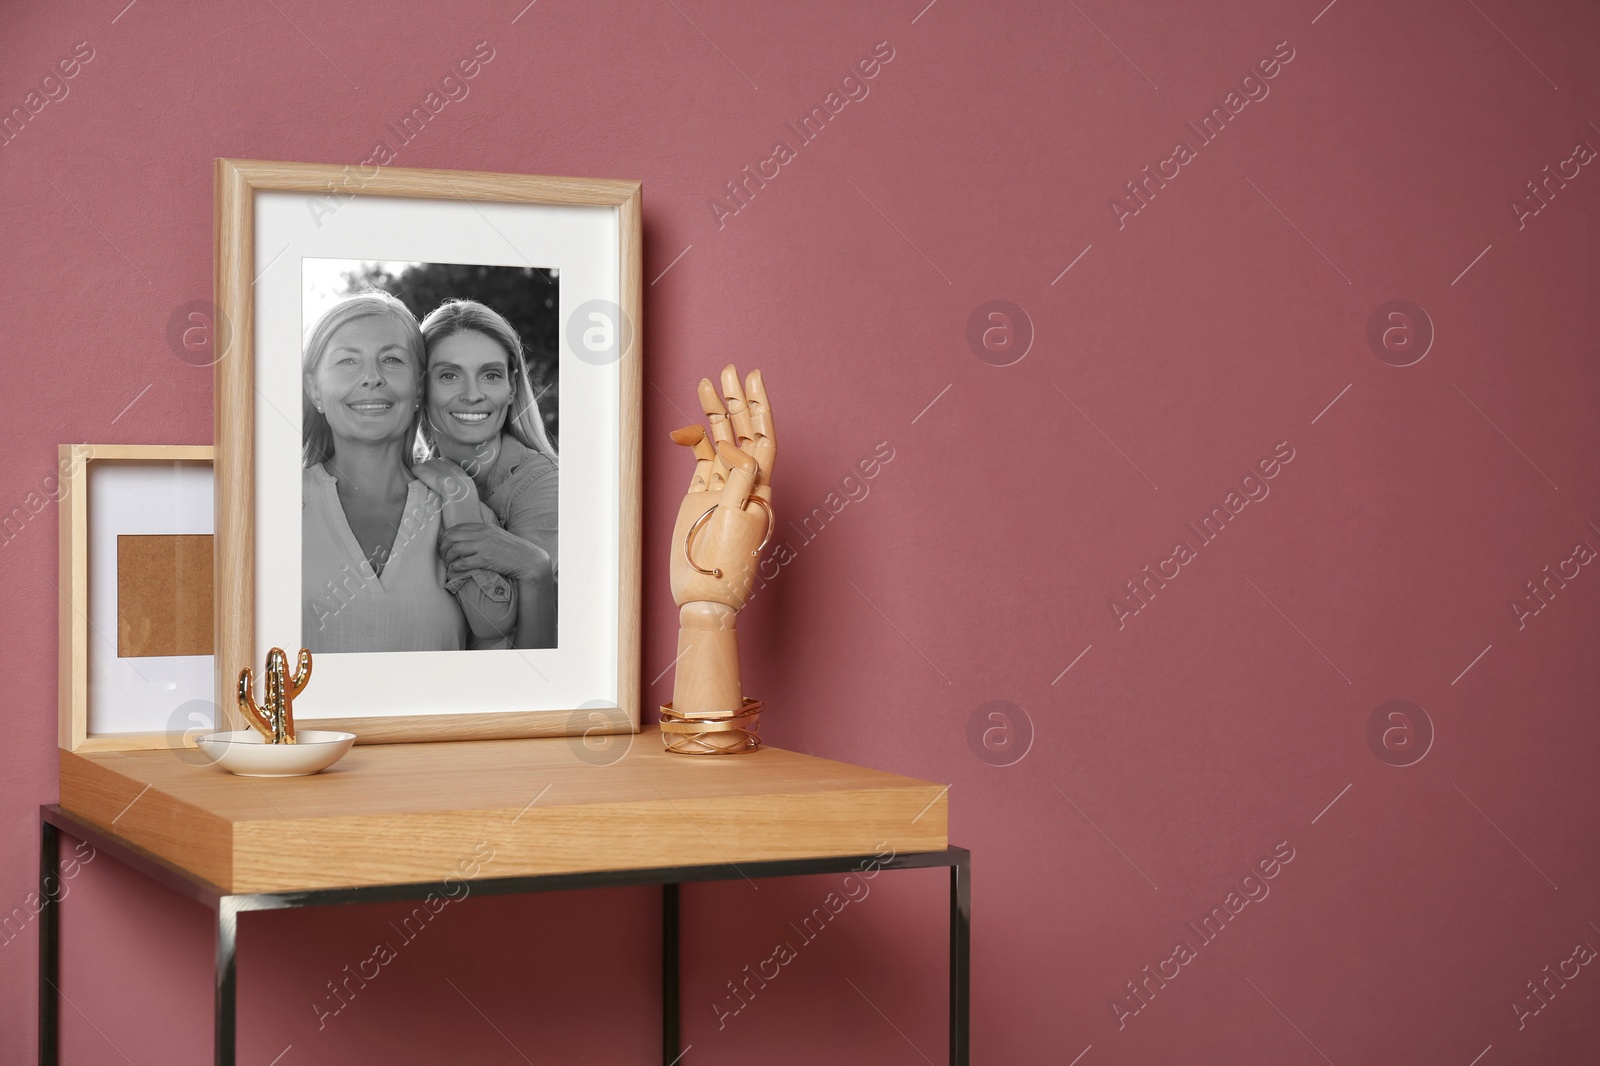 Image of Black and white family portrait of mother and daughter in photo frame on table near color wall